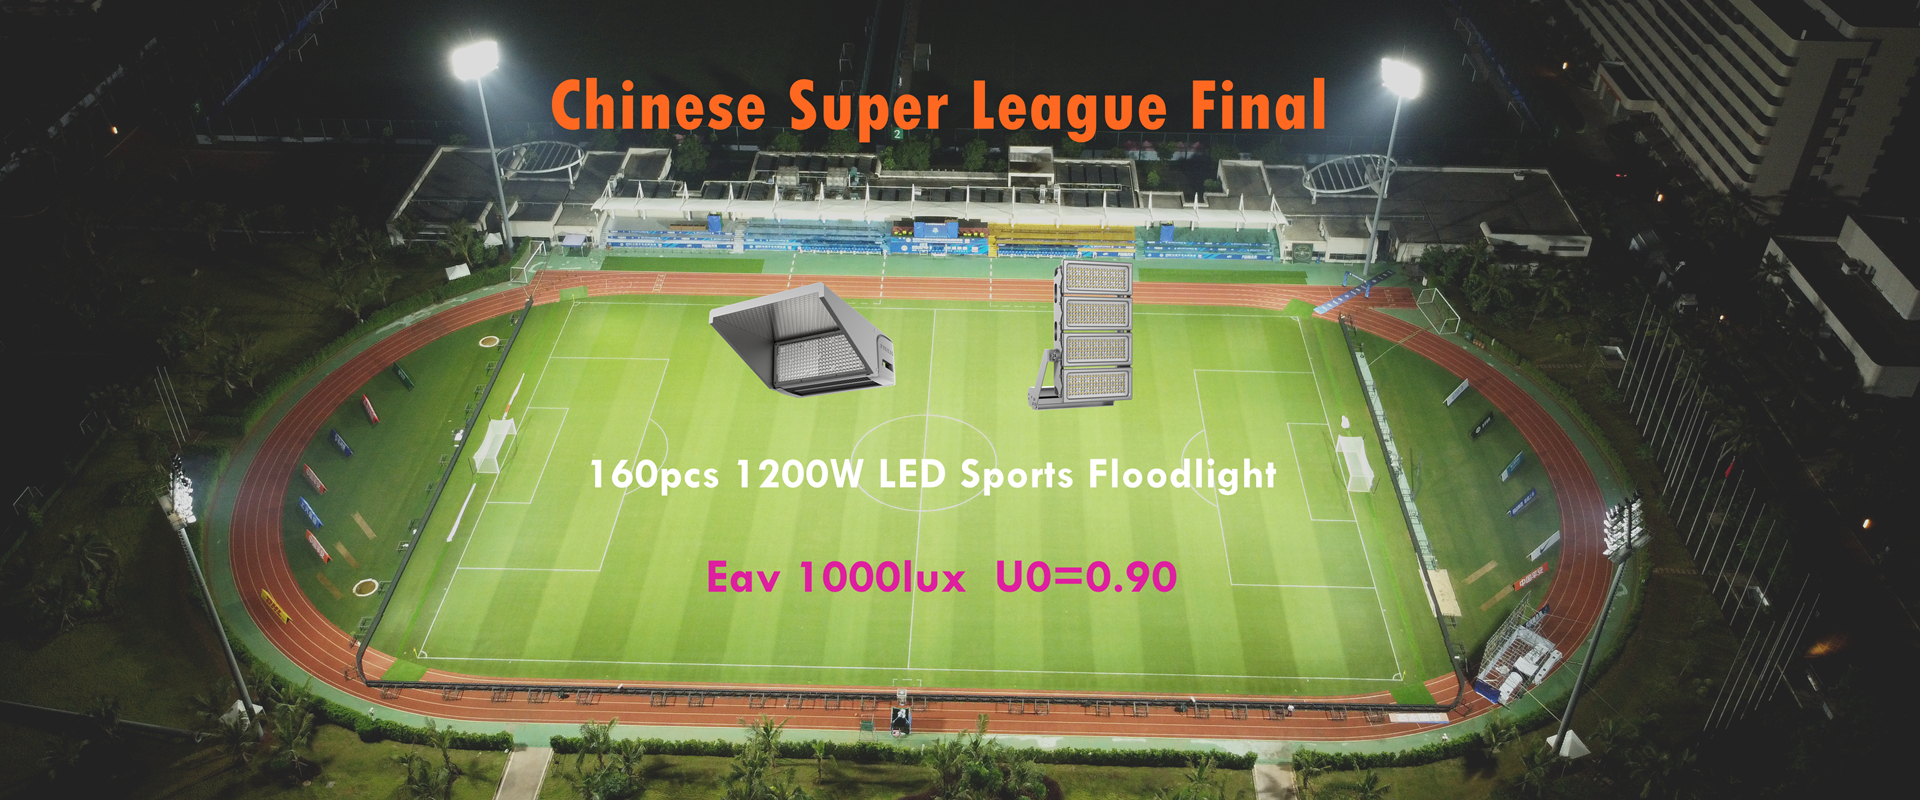 1200W LED sports floodlight for chinese super league 2022 in Haikou football stadium